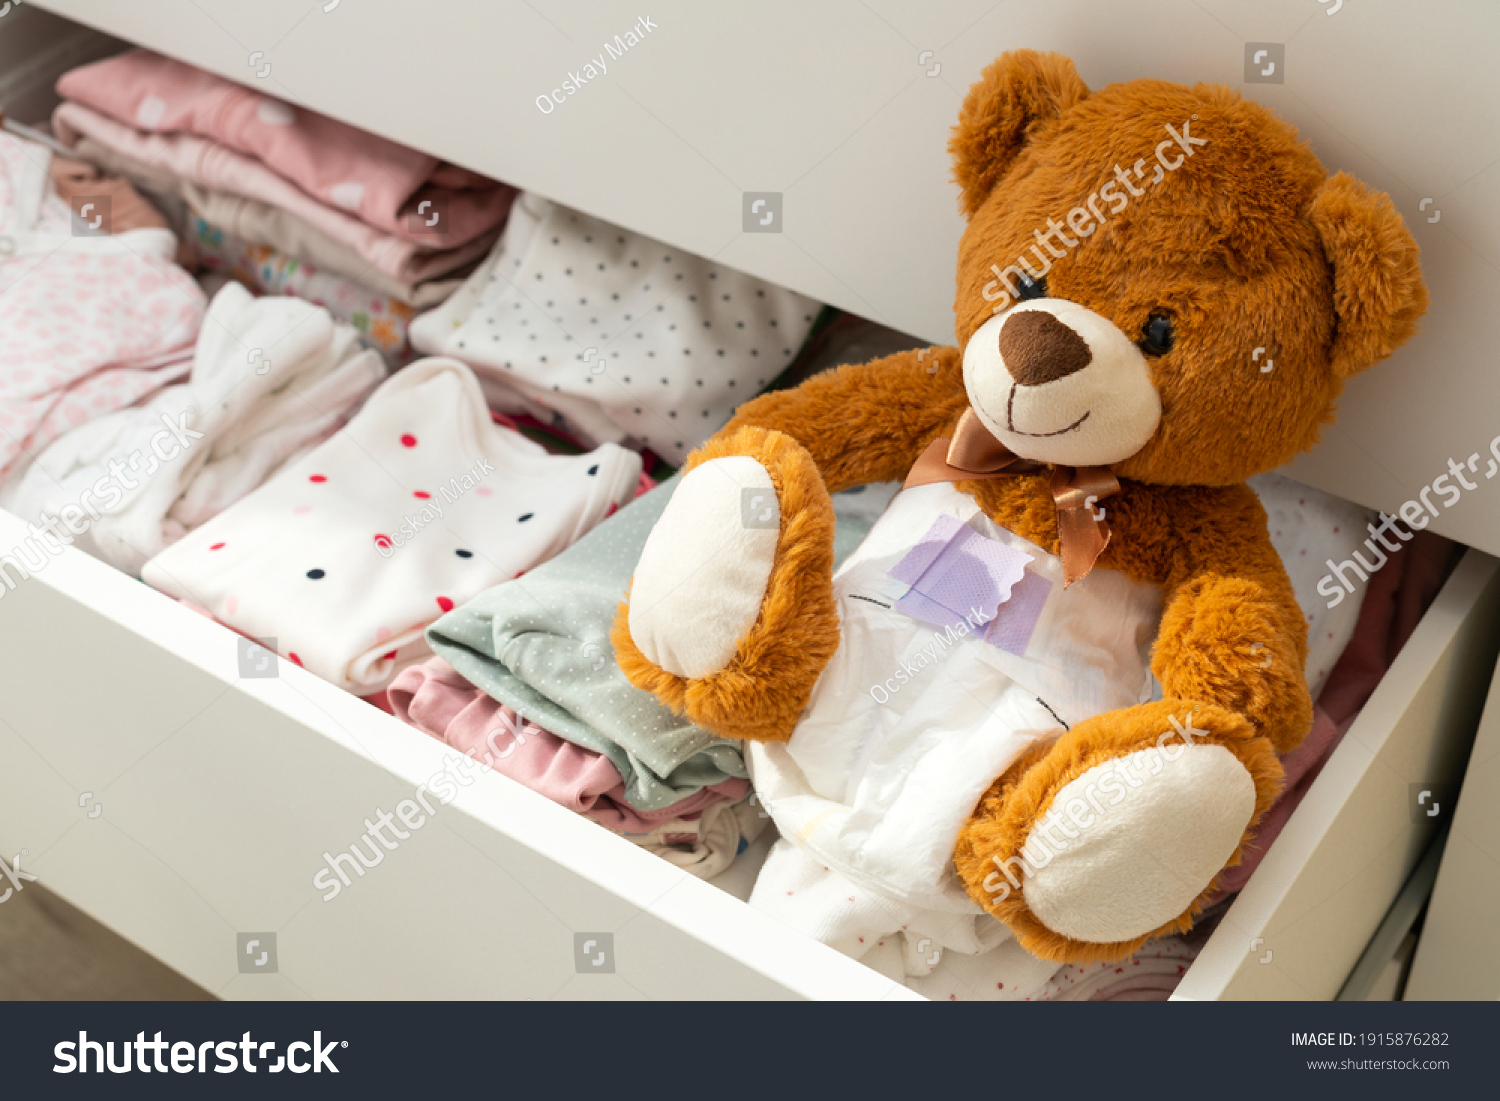 Pcture of a brown teddy bear with diaper on sitting in baby bed #1915876282